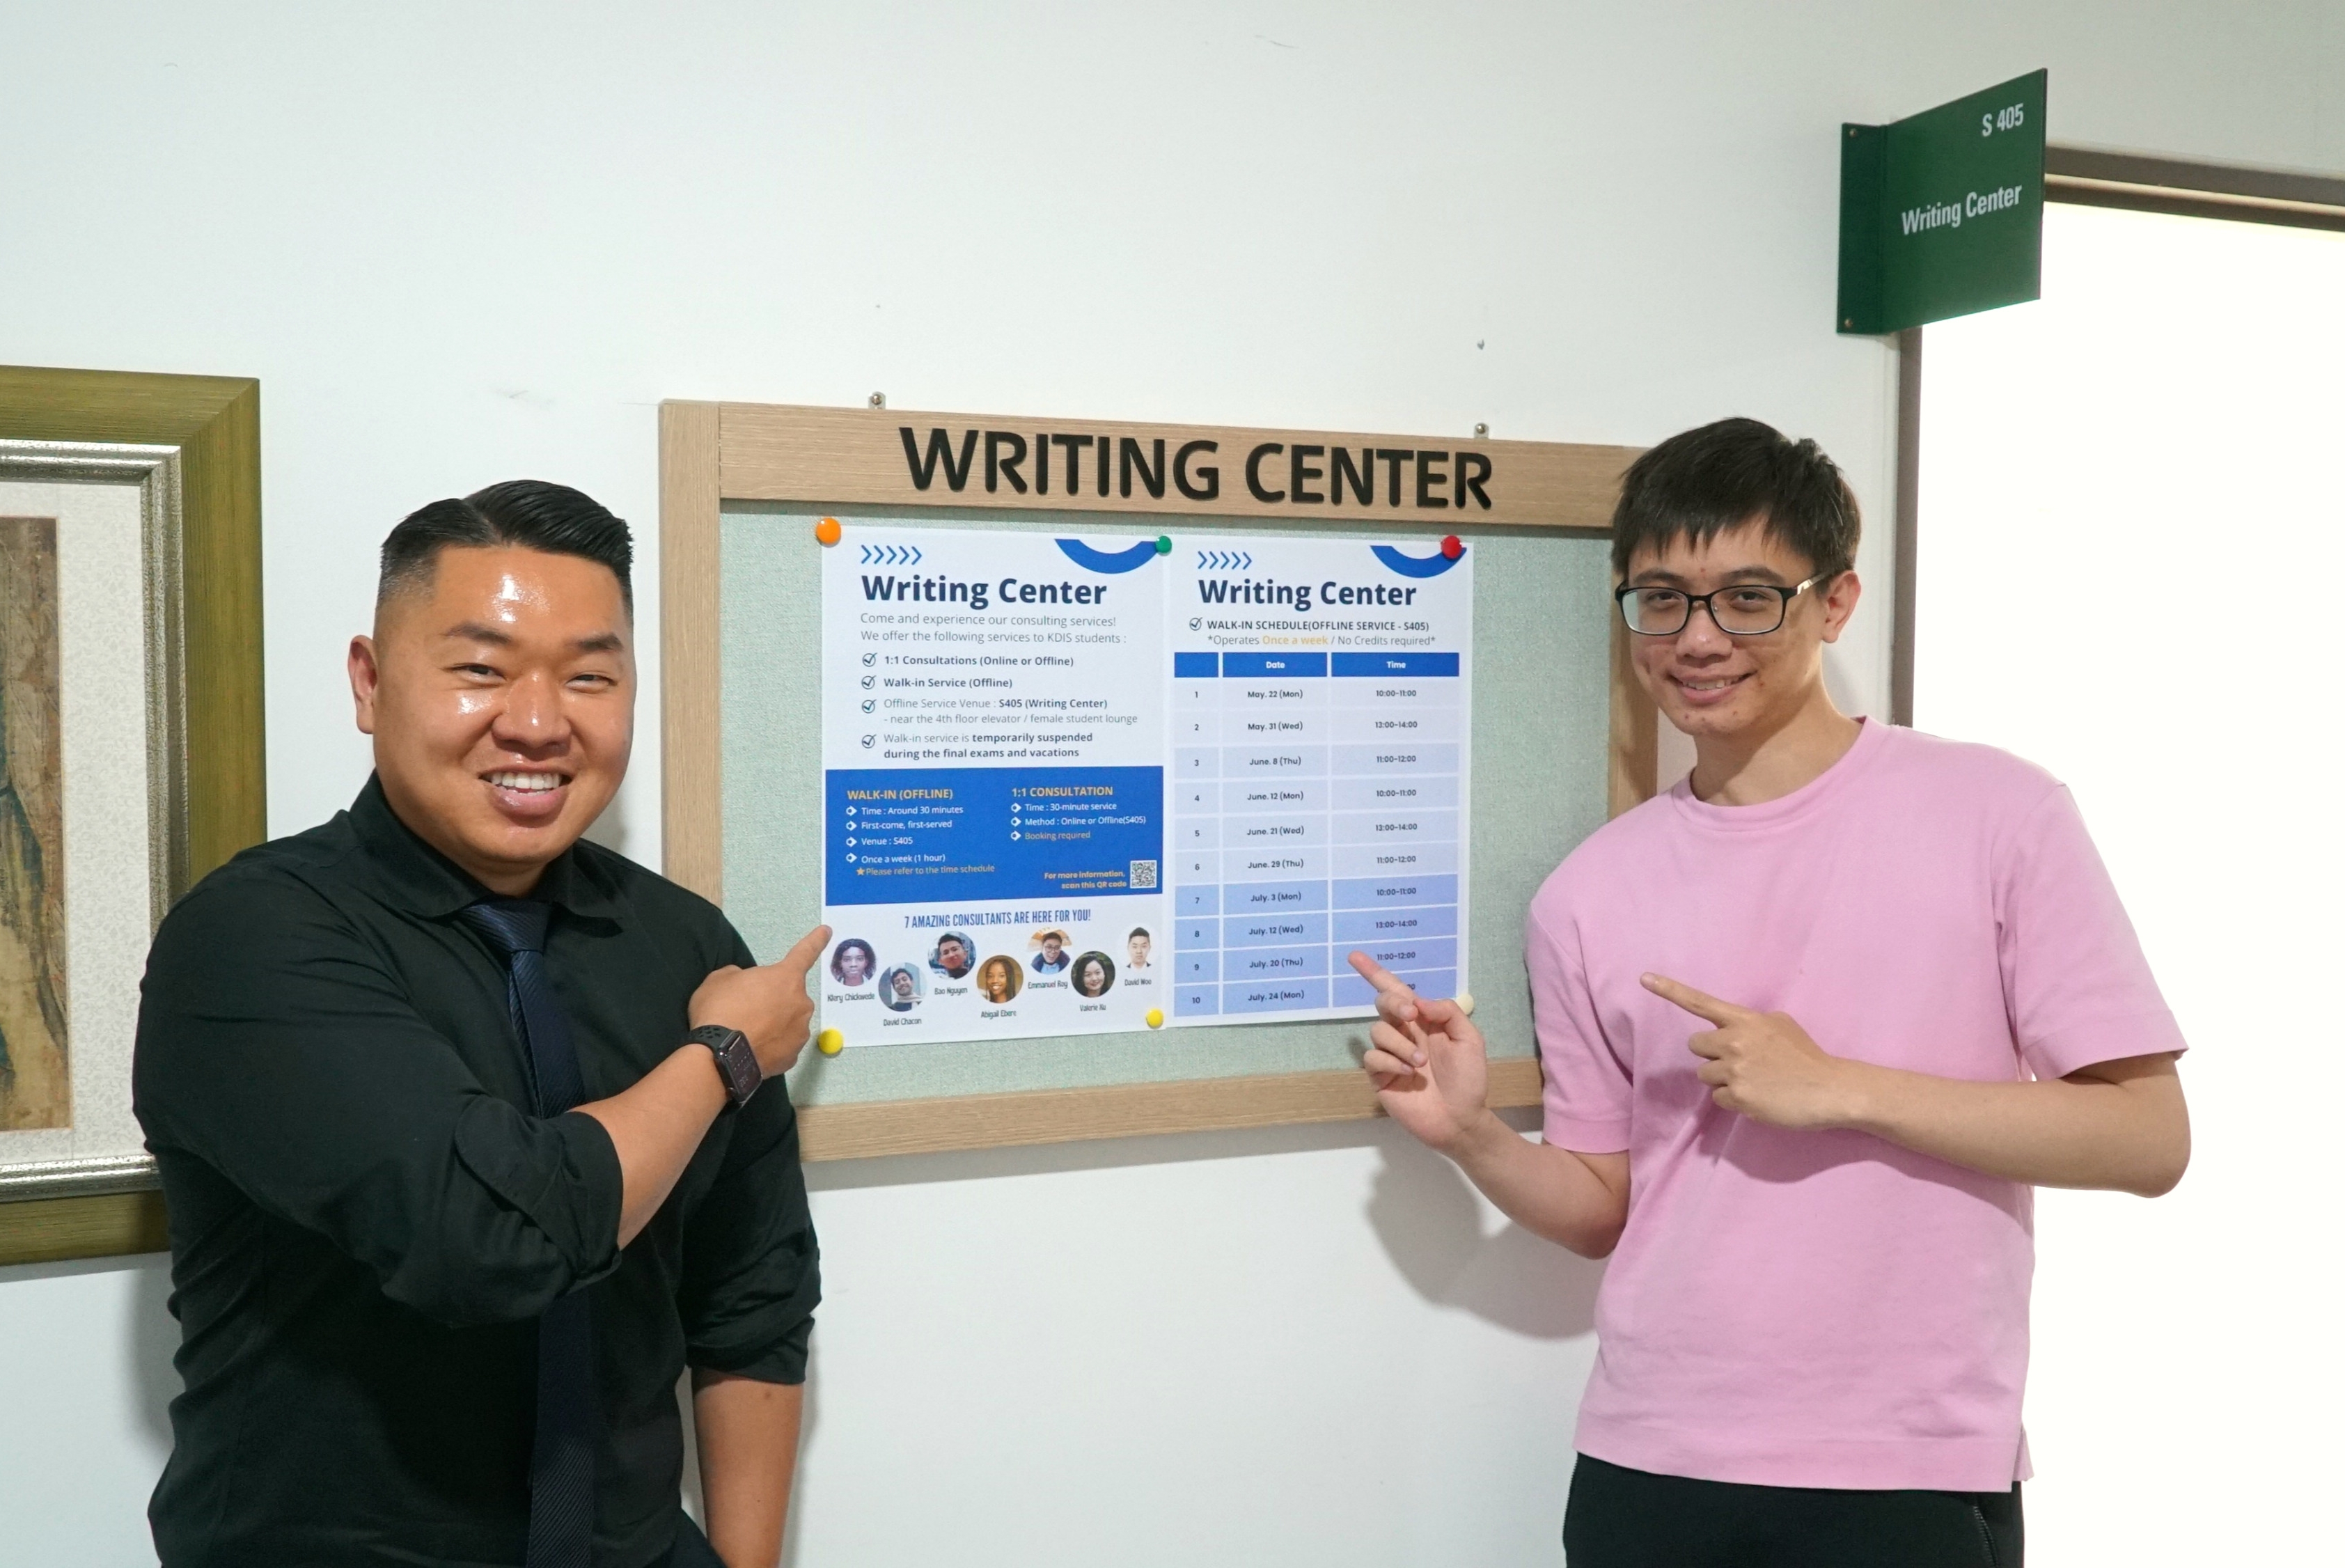 Interview with Professor Plumb, the director of Writing Center at KDI School